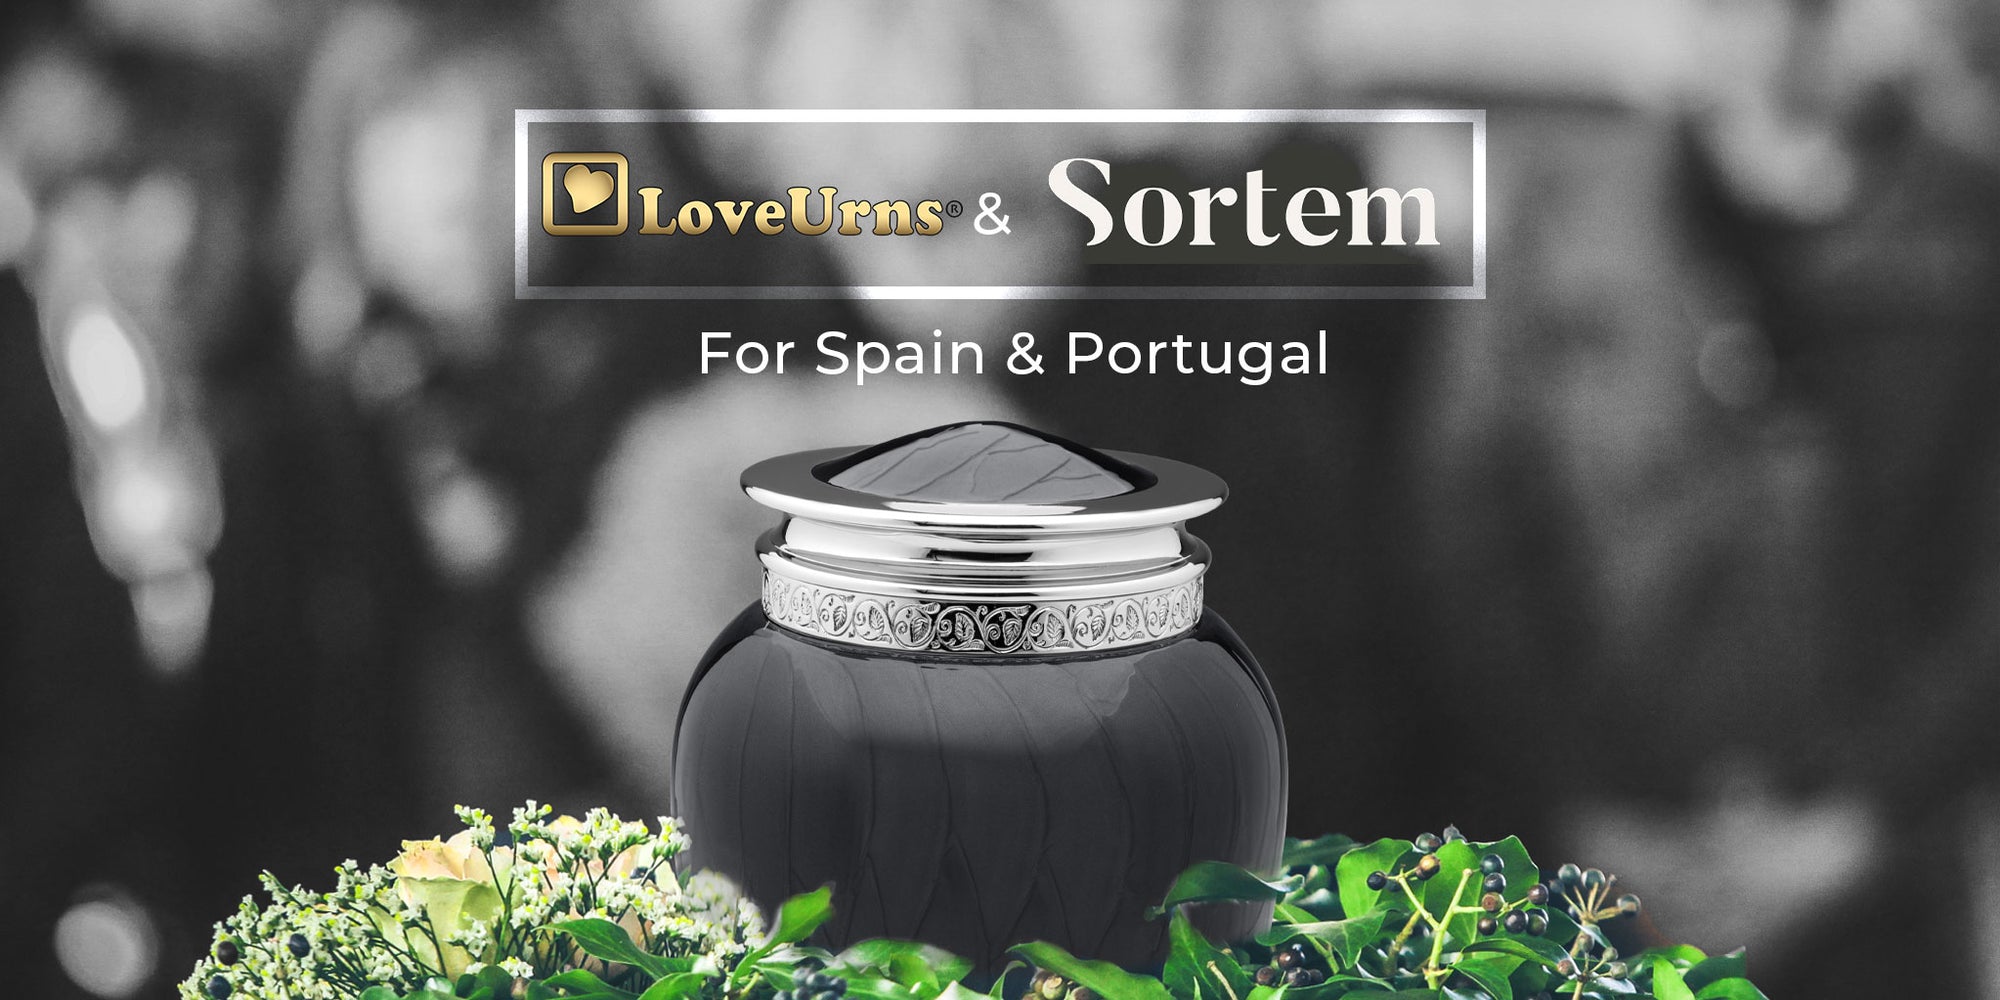 LoveUrns® and Sortem of Spain have joined hands.